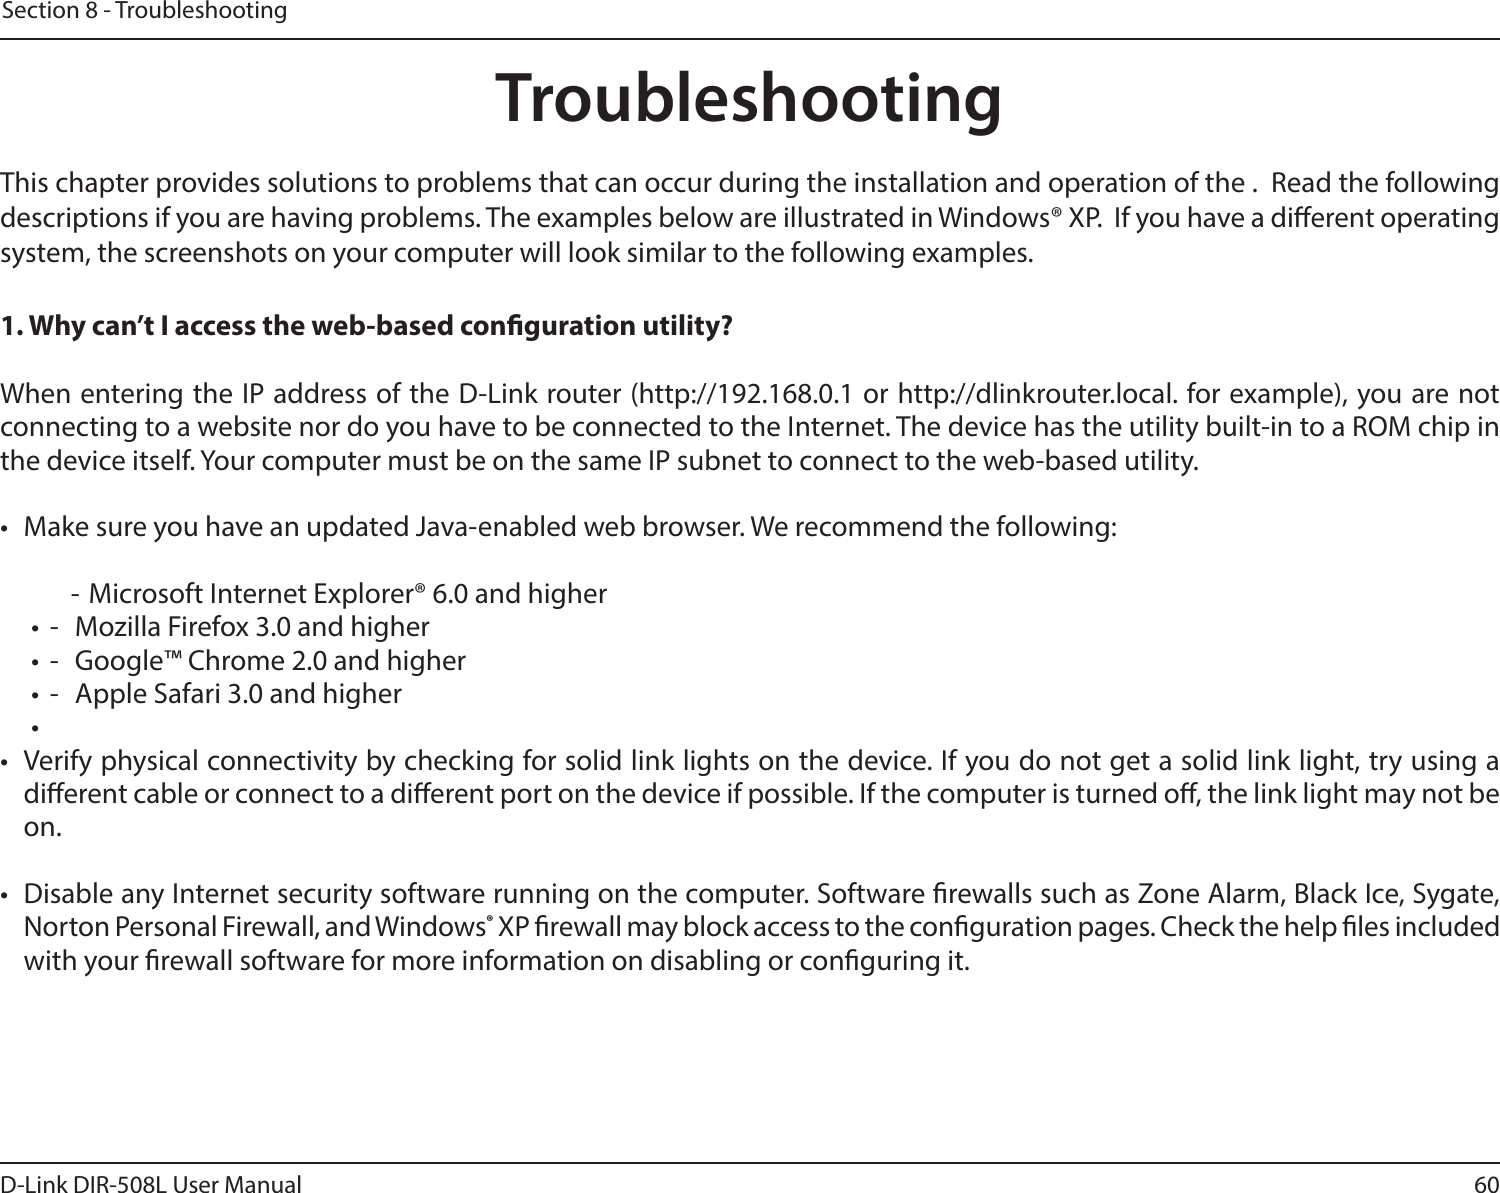 60D-Link DIR-508L User ManualSection 8 - TroubleshootingTroubleshootingThis chapter provides solutions to problems that can occur during the installation and operation of the .  Read the following descriptions if you are having problems. The examples below are illustrated in Windows® XP.  If you have a dierent operating system, the screenshots on your computer will look similar to the following examples.1. Why can’t I access the web-based conguration utility?When entering the IP address of the D-Link router (http://192.168.0.1 or http://dlinkrouter.local. for example), you are not connecting to a website nor do you have to be connected to the Internet. The device has the utility built-in to a ROM chip in the device itself. Your computer must be on the same IP subnet to connect to the web-based utility. •  Make sure you have an updated Java-enabled web browser. We recommend the following:  - Microsoft Internet Explorer® 6.0 and higher•  -  Mozilla Firefox 3.0 and higher•  -  Google™ Chrome 2.0 and higher•  -  Apple Safari 3.0 and higher• •  Verify physical connectivity by checking for solid link lights on the device. If you do not get a solid link light, try using a dierent cable or connect to a dierent port on the device if possible. If the computer is turned o, the link light may not be on.•  Disable any Internet security software running on the computer. Software rewalls such as Zone Alarm, Black Ice, Sygate, Norton Personal Firewall, and Windows® XP rewall may block access to the conguration pages. Check the help les included with your rewall software for more information on disabling or conguring it.